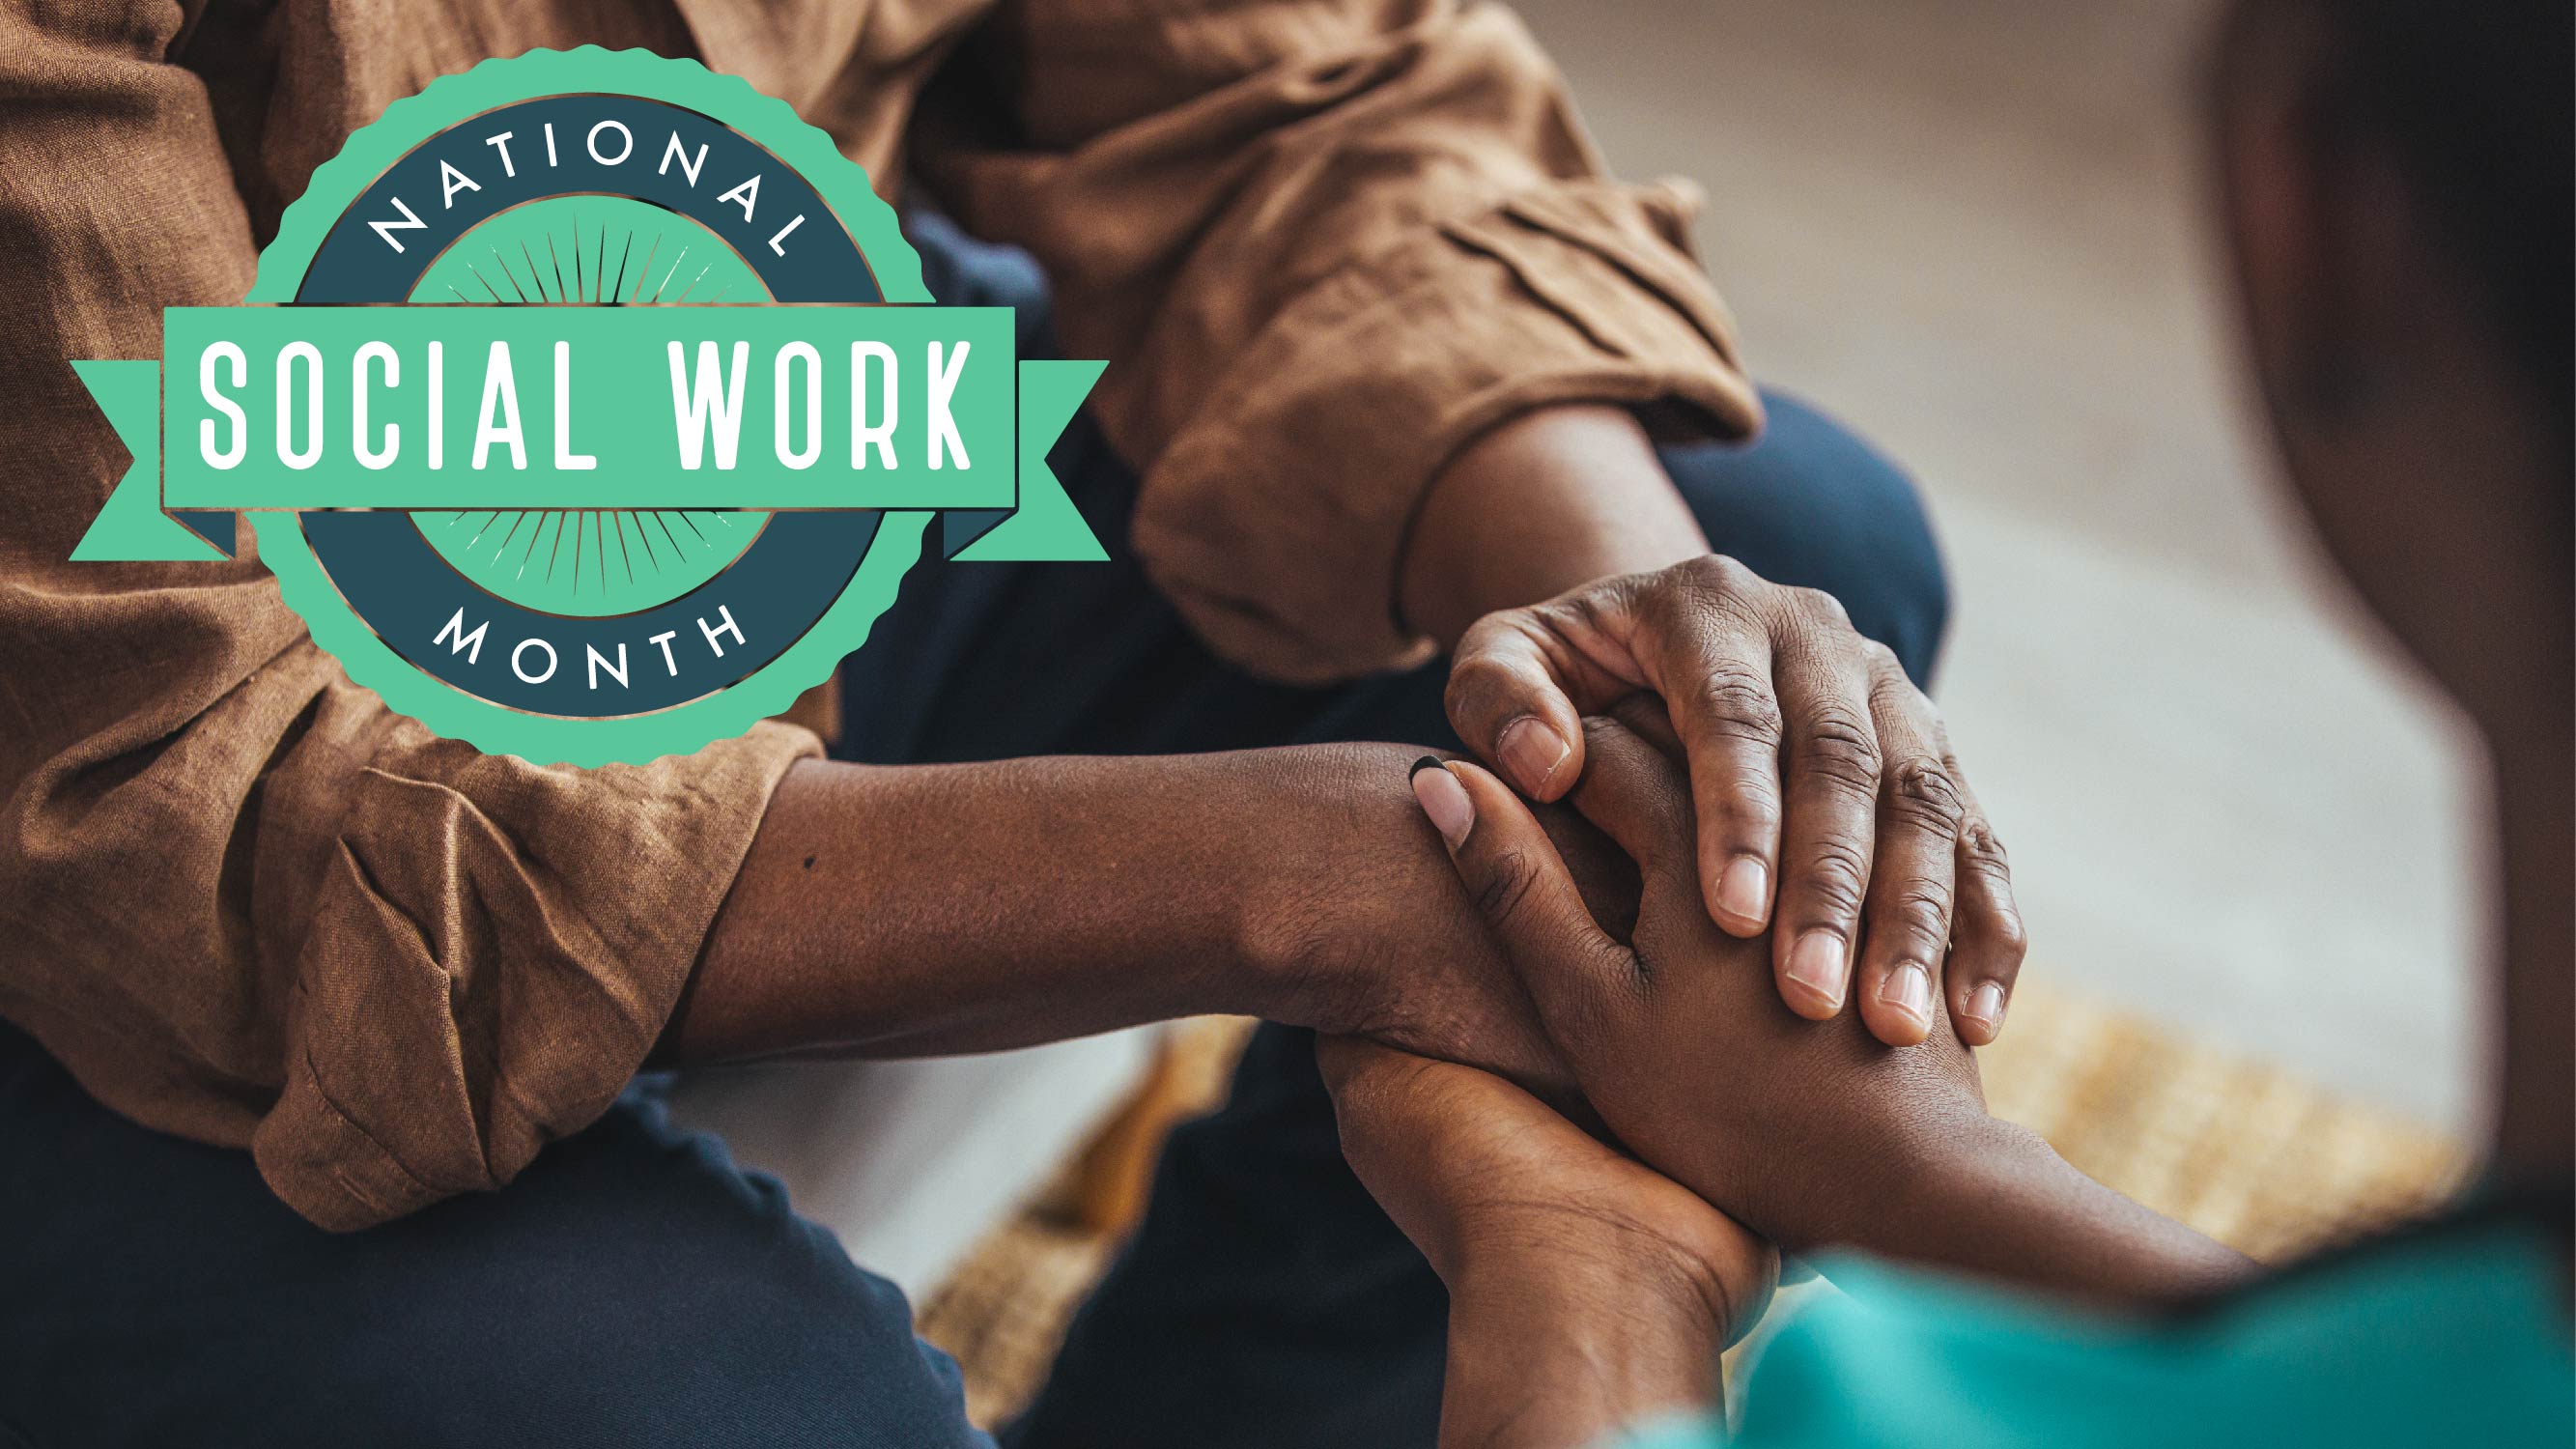 Baylor Celebrates National Social Work Month in March